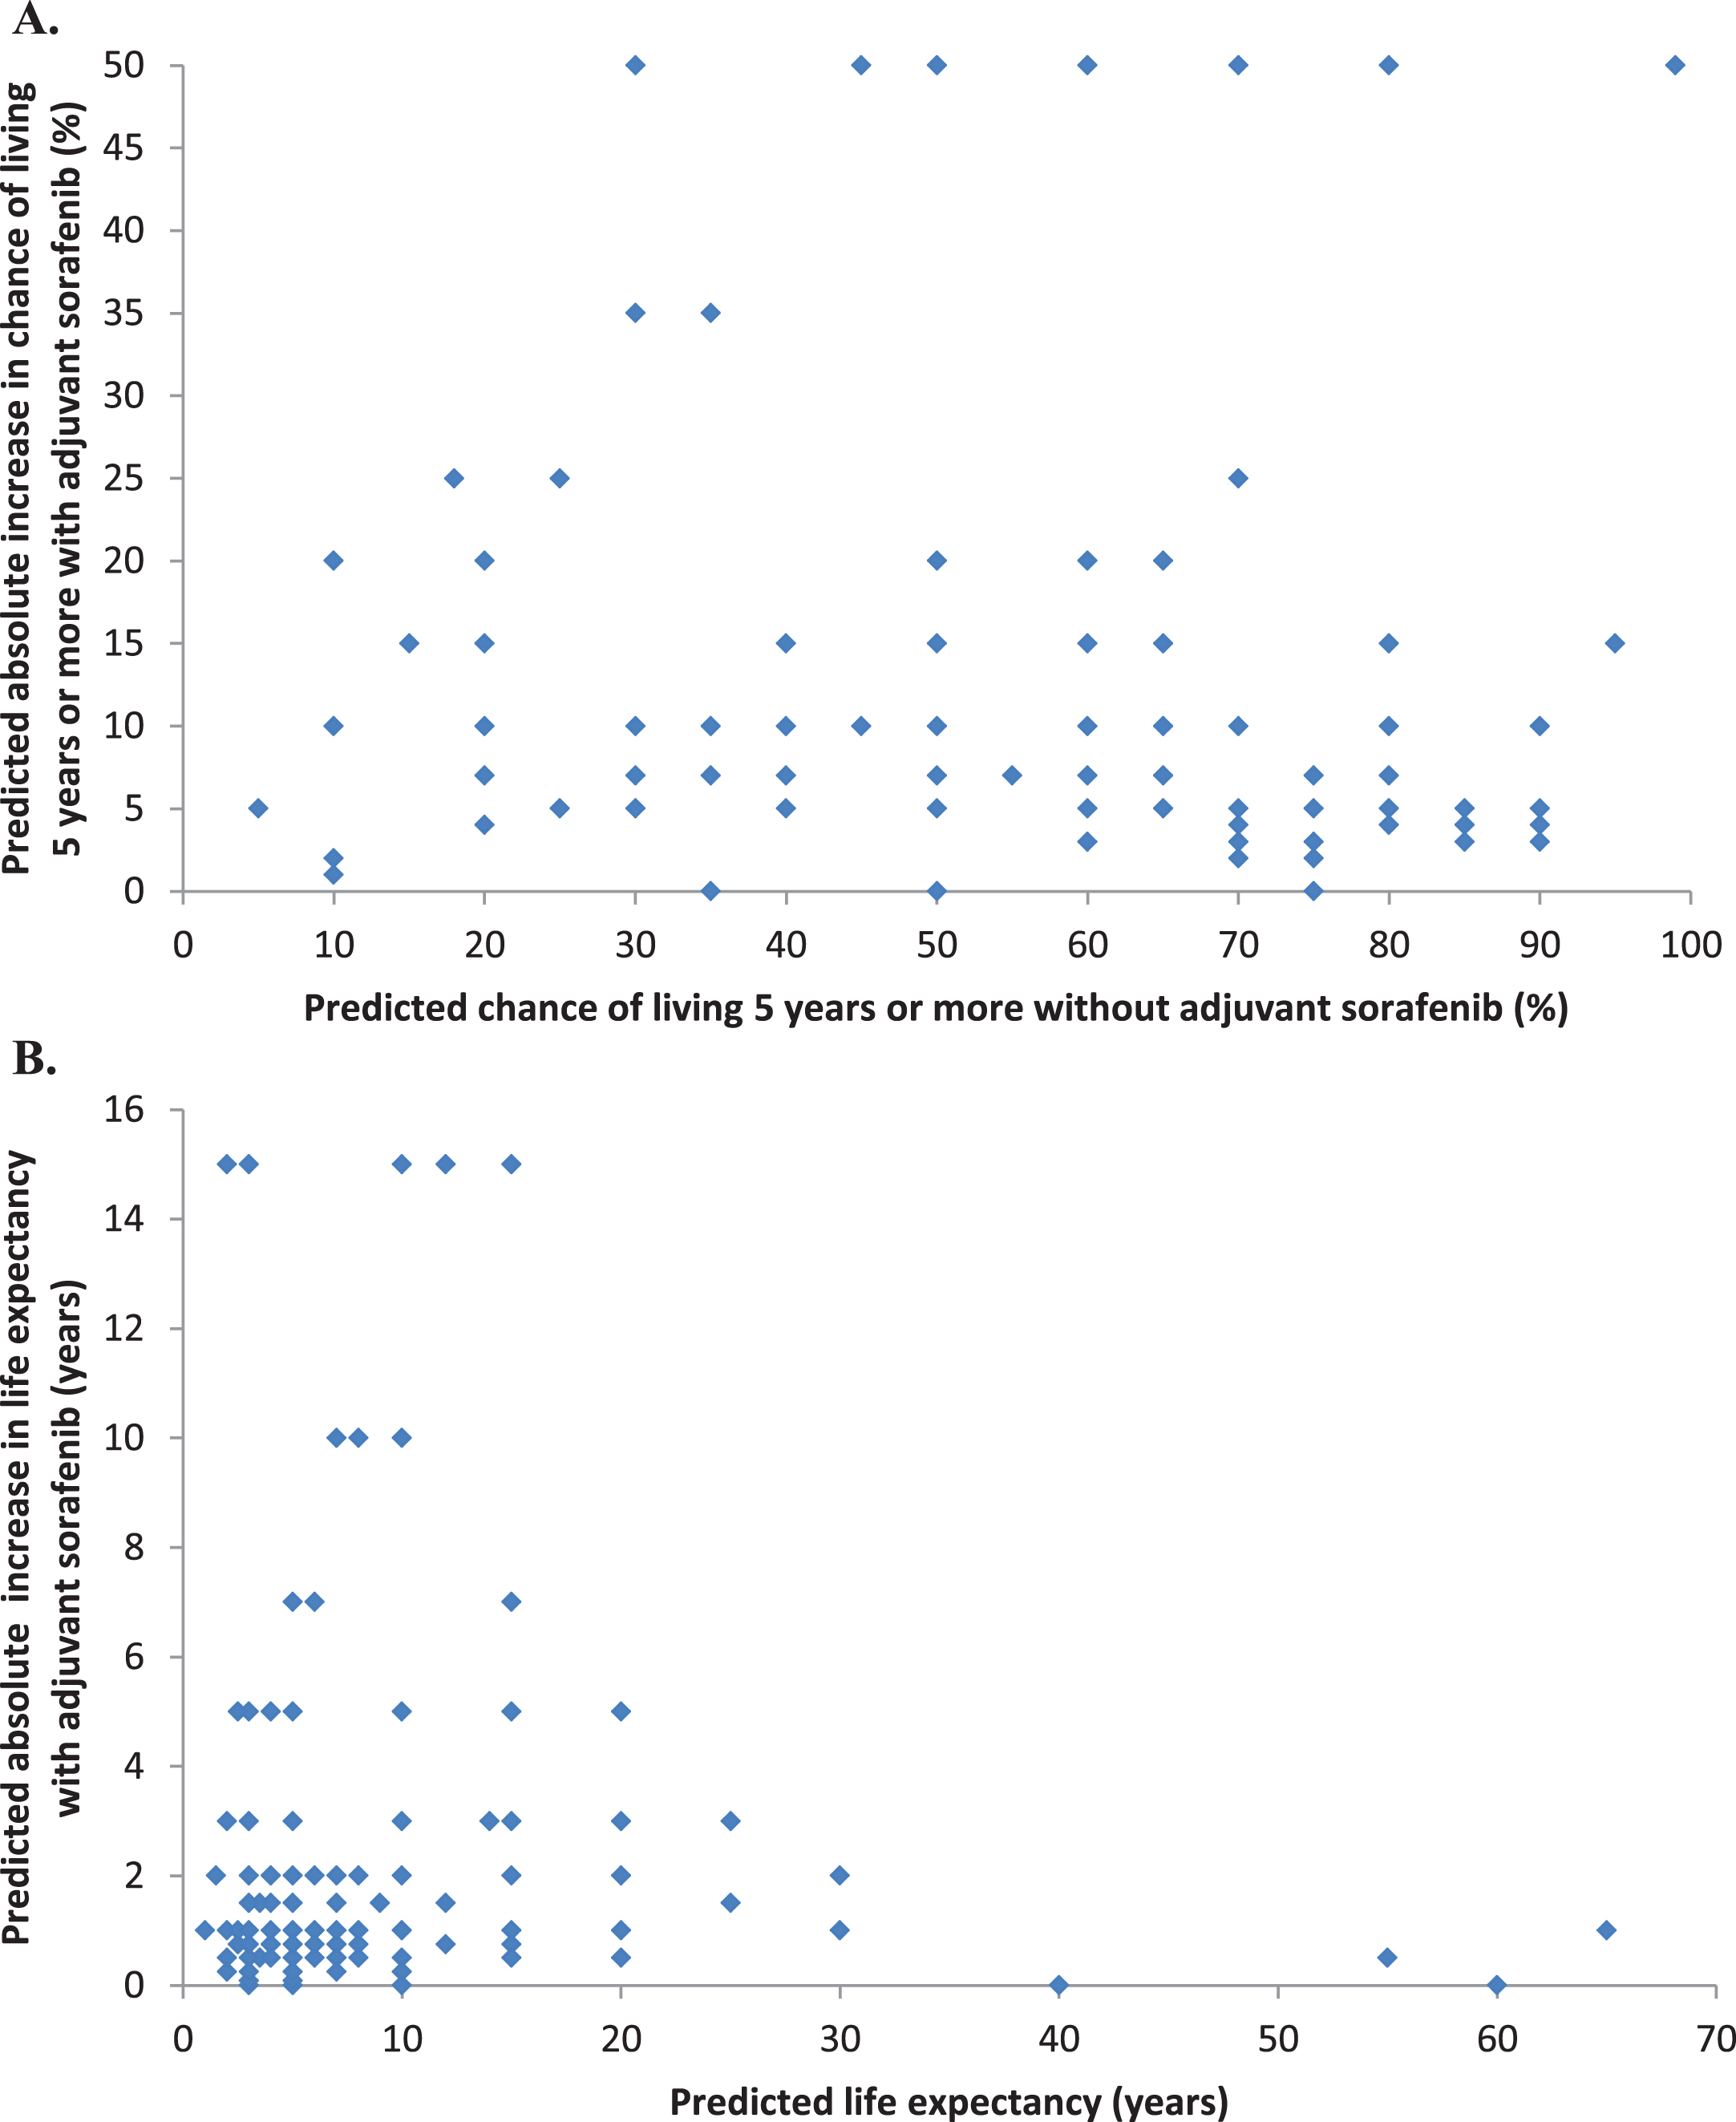 Relationship between predicted survival without adjuvant sorafenib, and predicted absolute benefit of adjuvant sorafenib (A. as a prediction of chance of living 5 years or more and B. as a prediction of life expectancy).